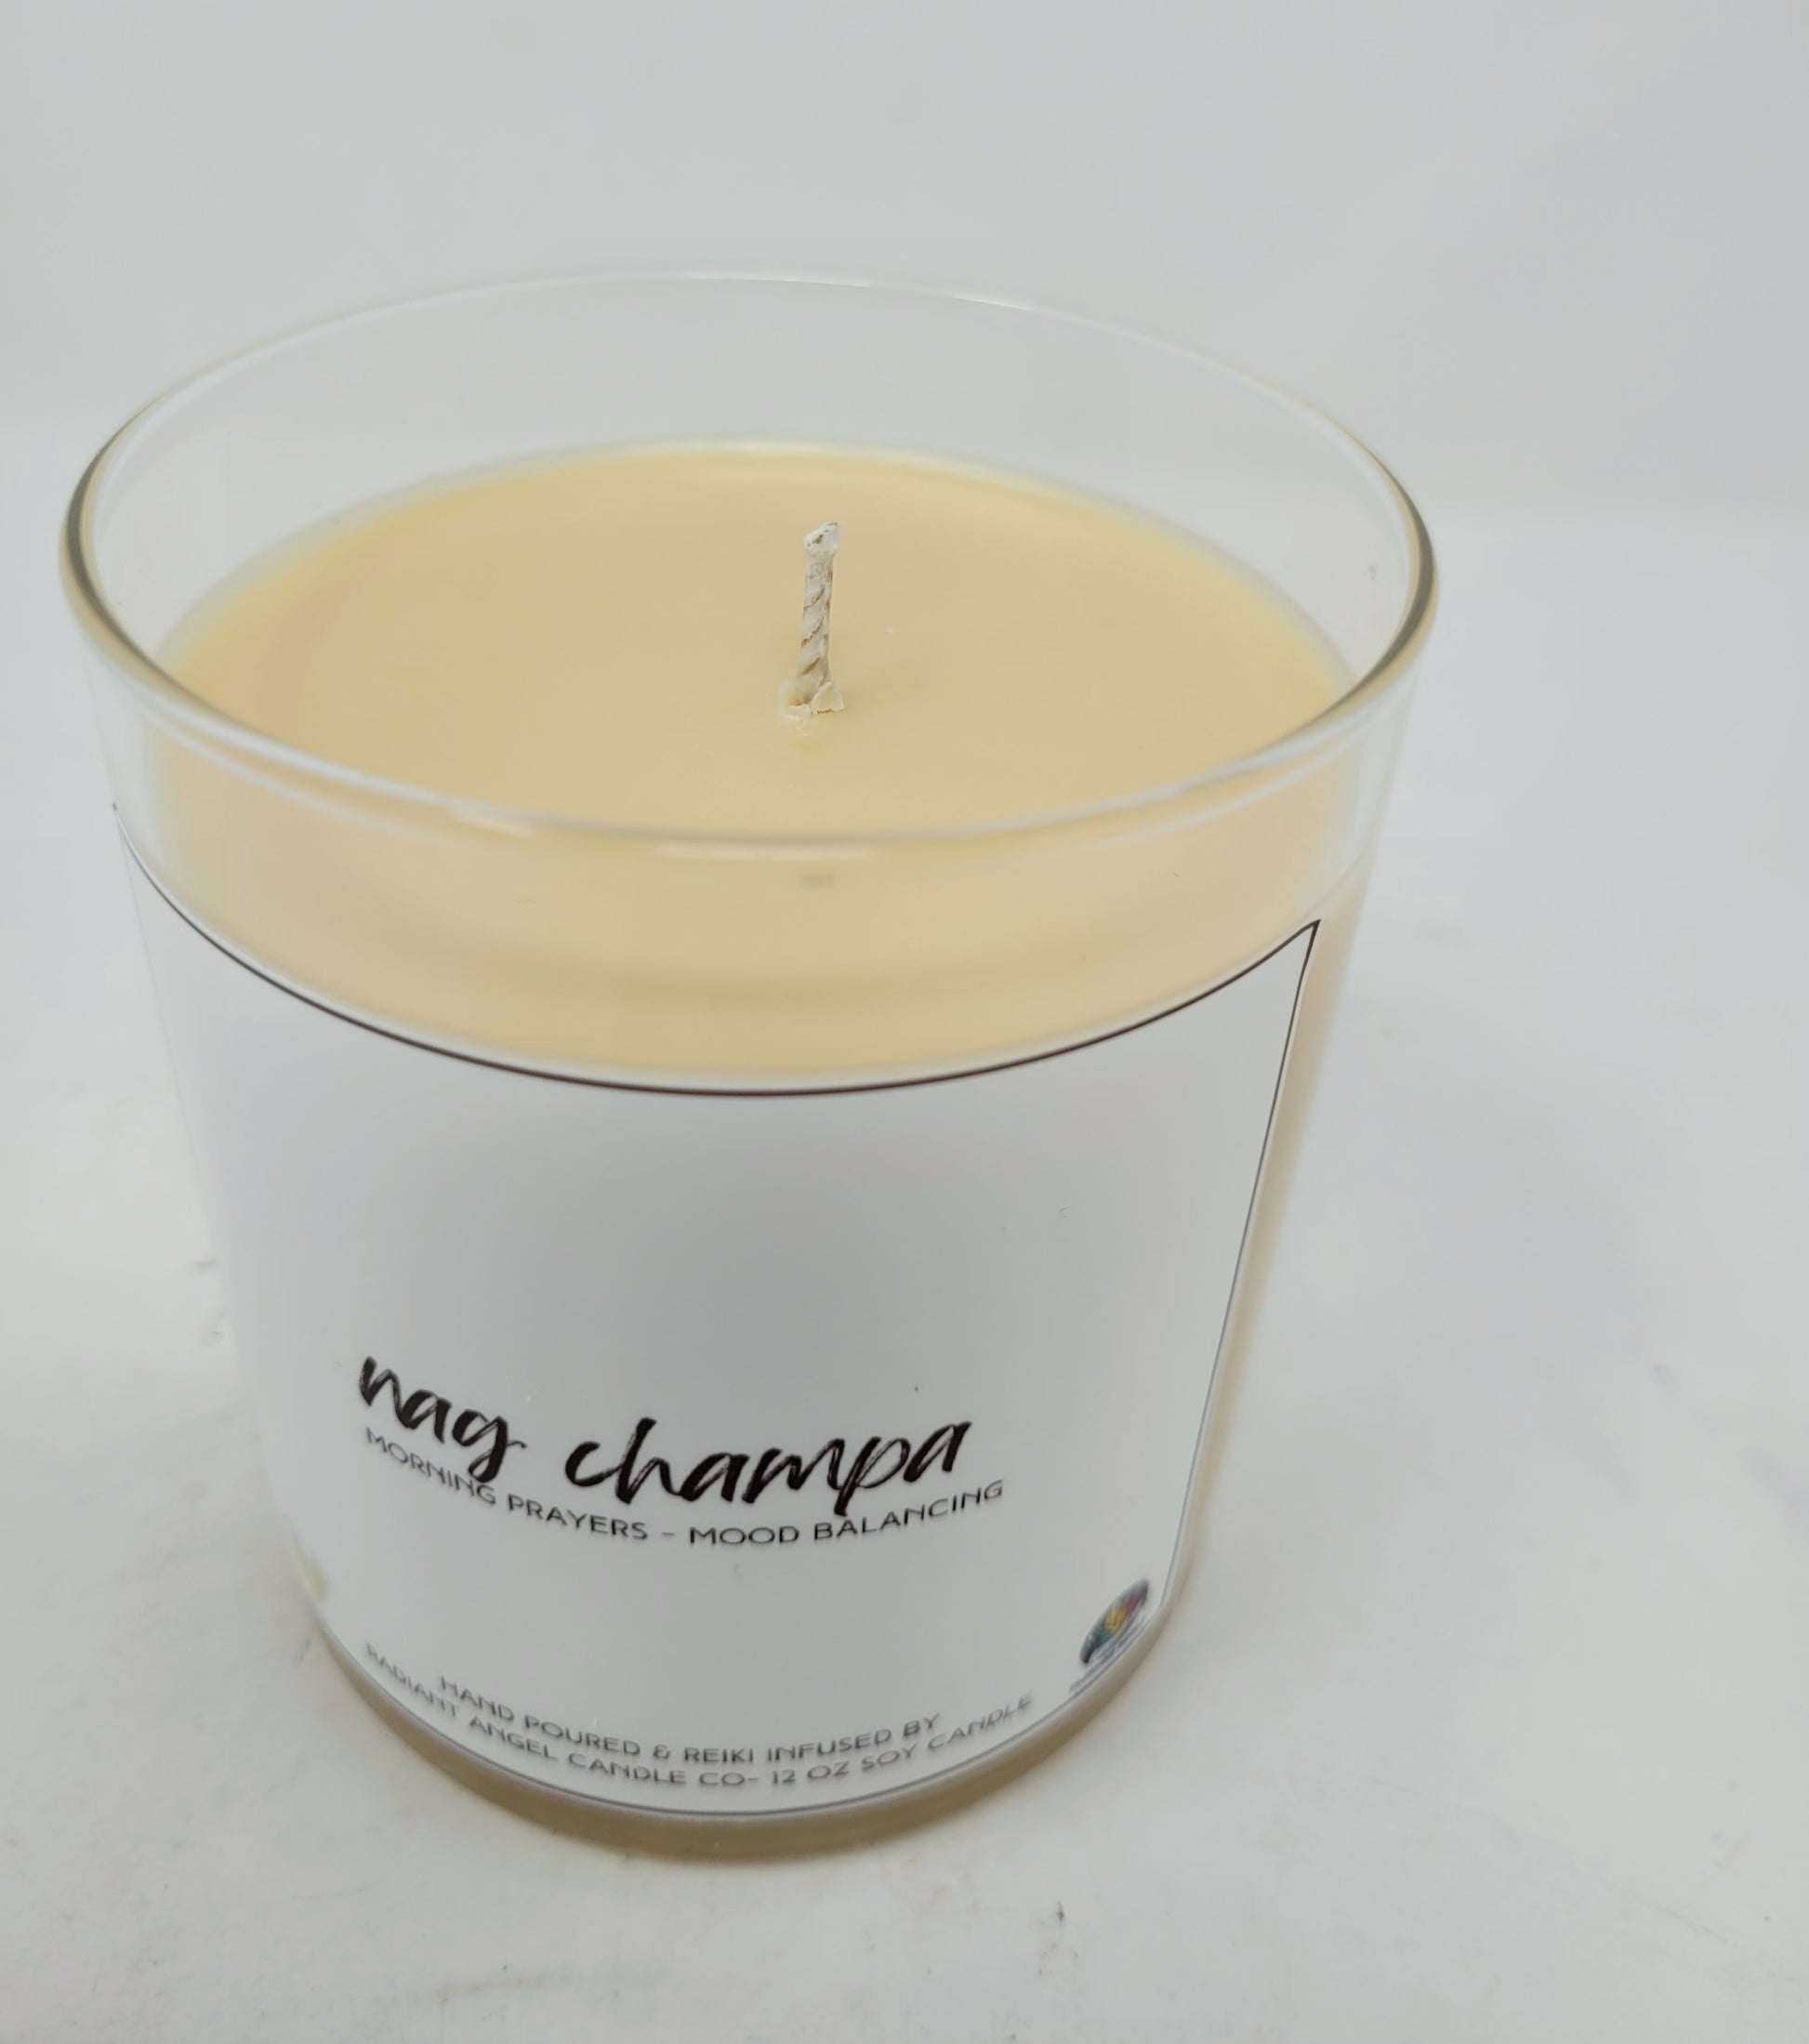 12 oz Soy Candle